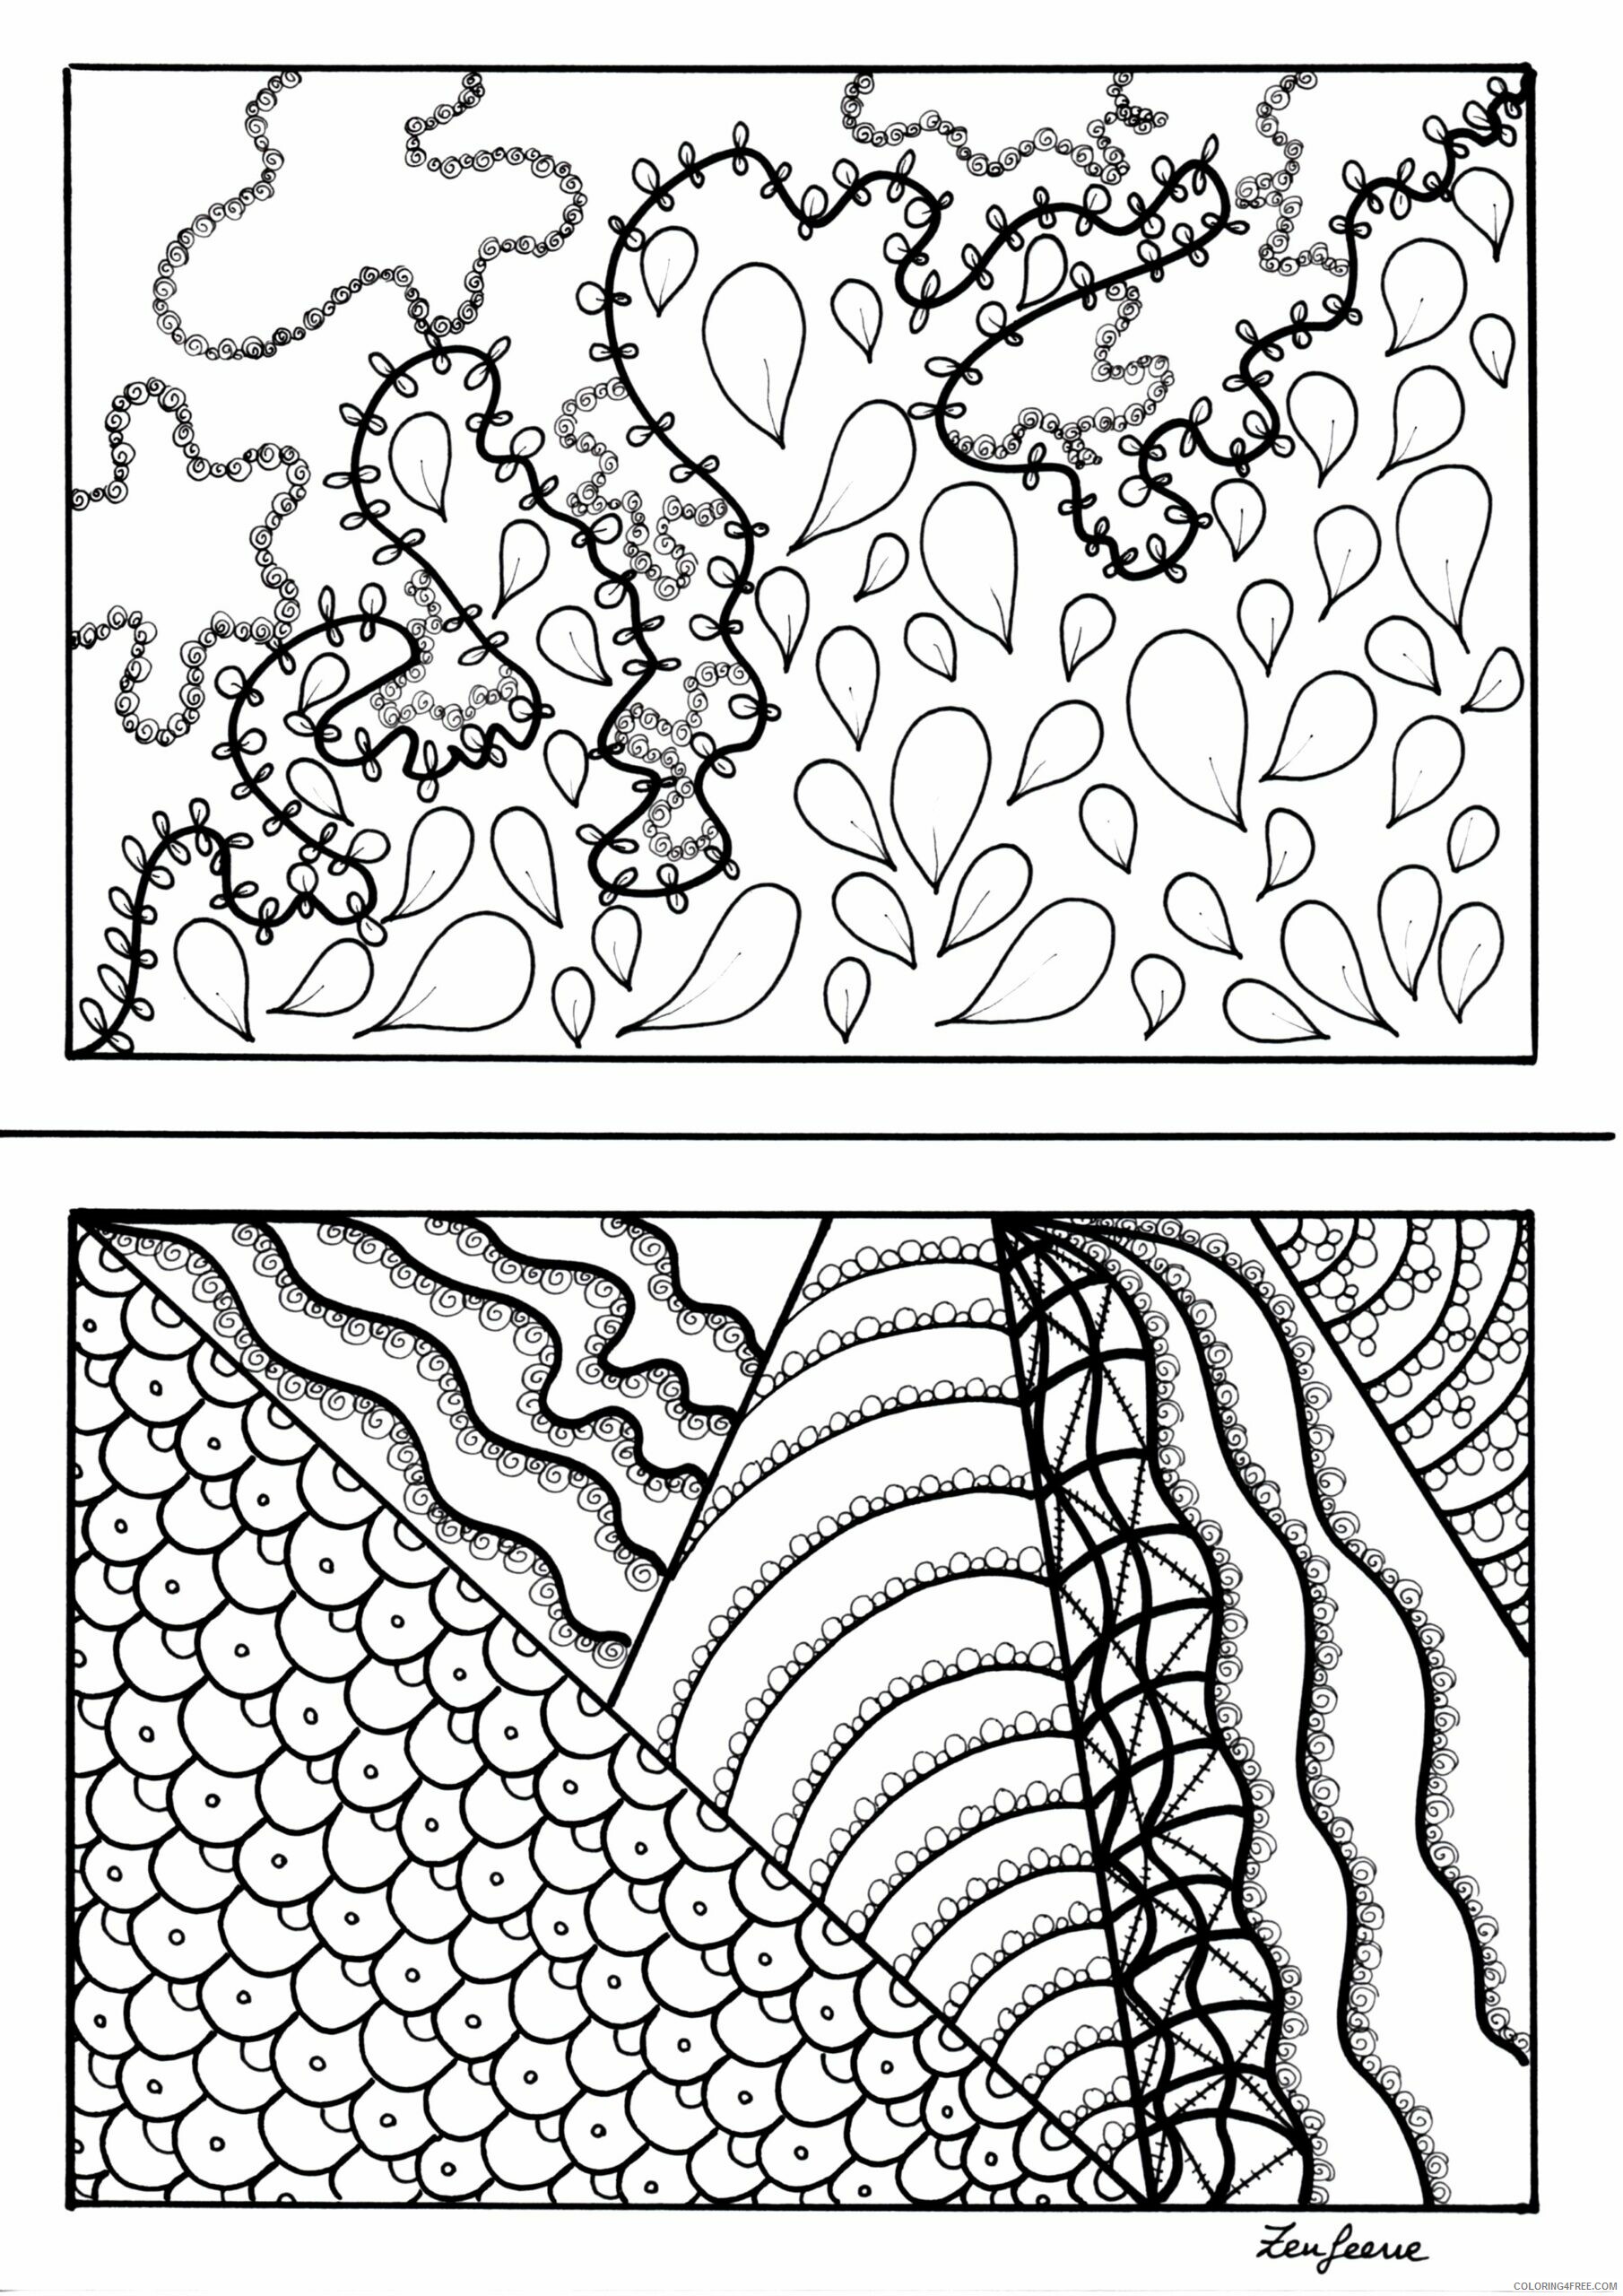 Adult Zentangle Coloring Pages adult imaginationa5 by zenfeerie Printable 2020 117 Coloring4free